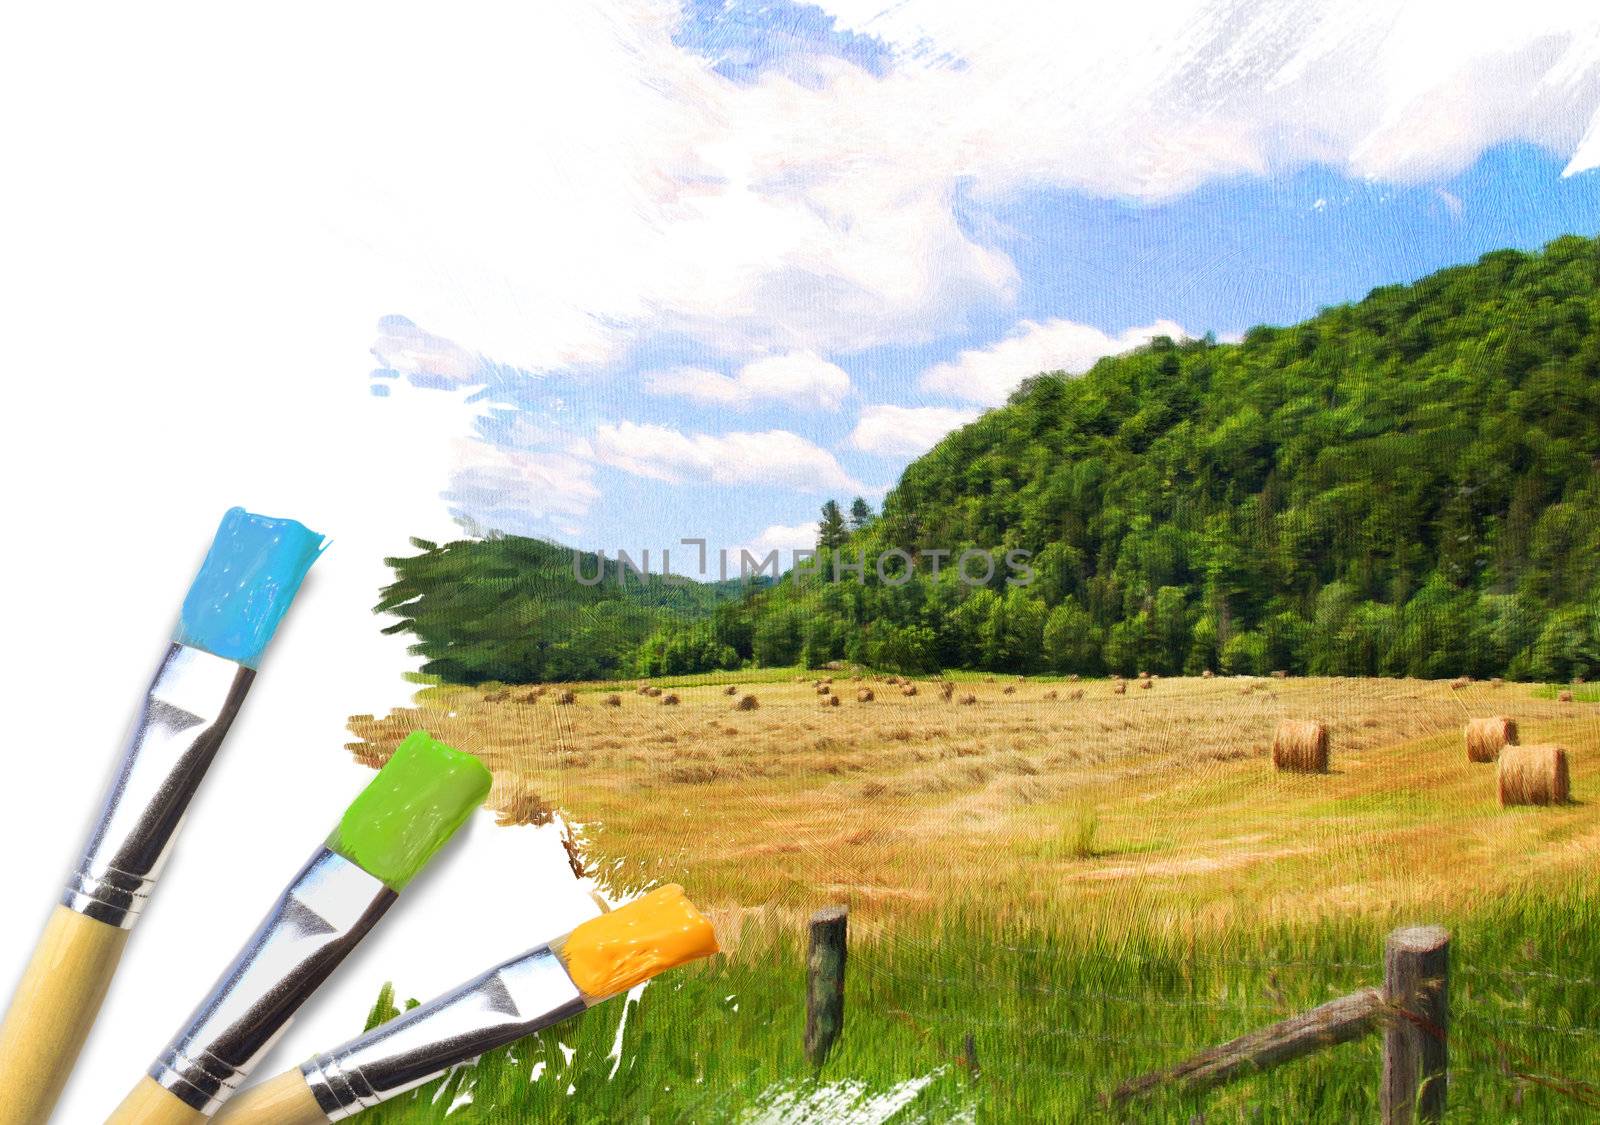 Artist brushes with a half finished painted rural landscape by Sandralise